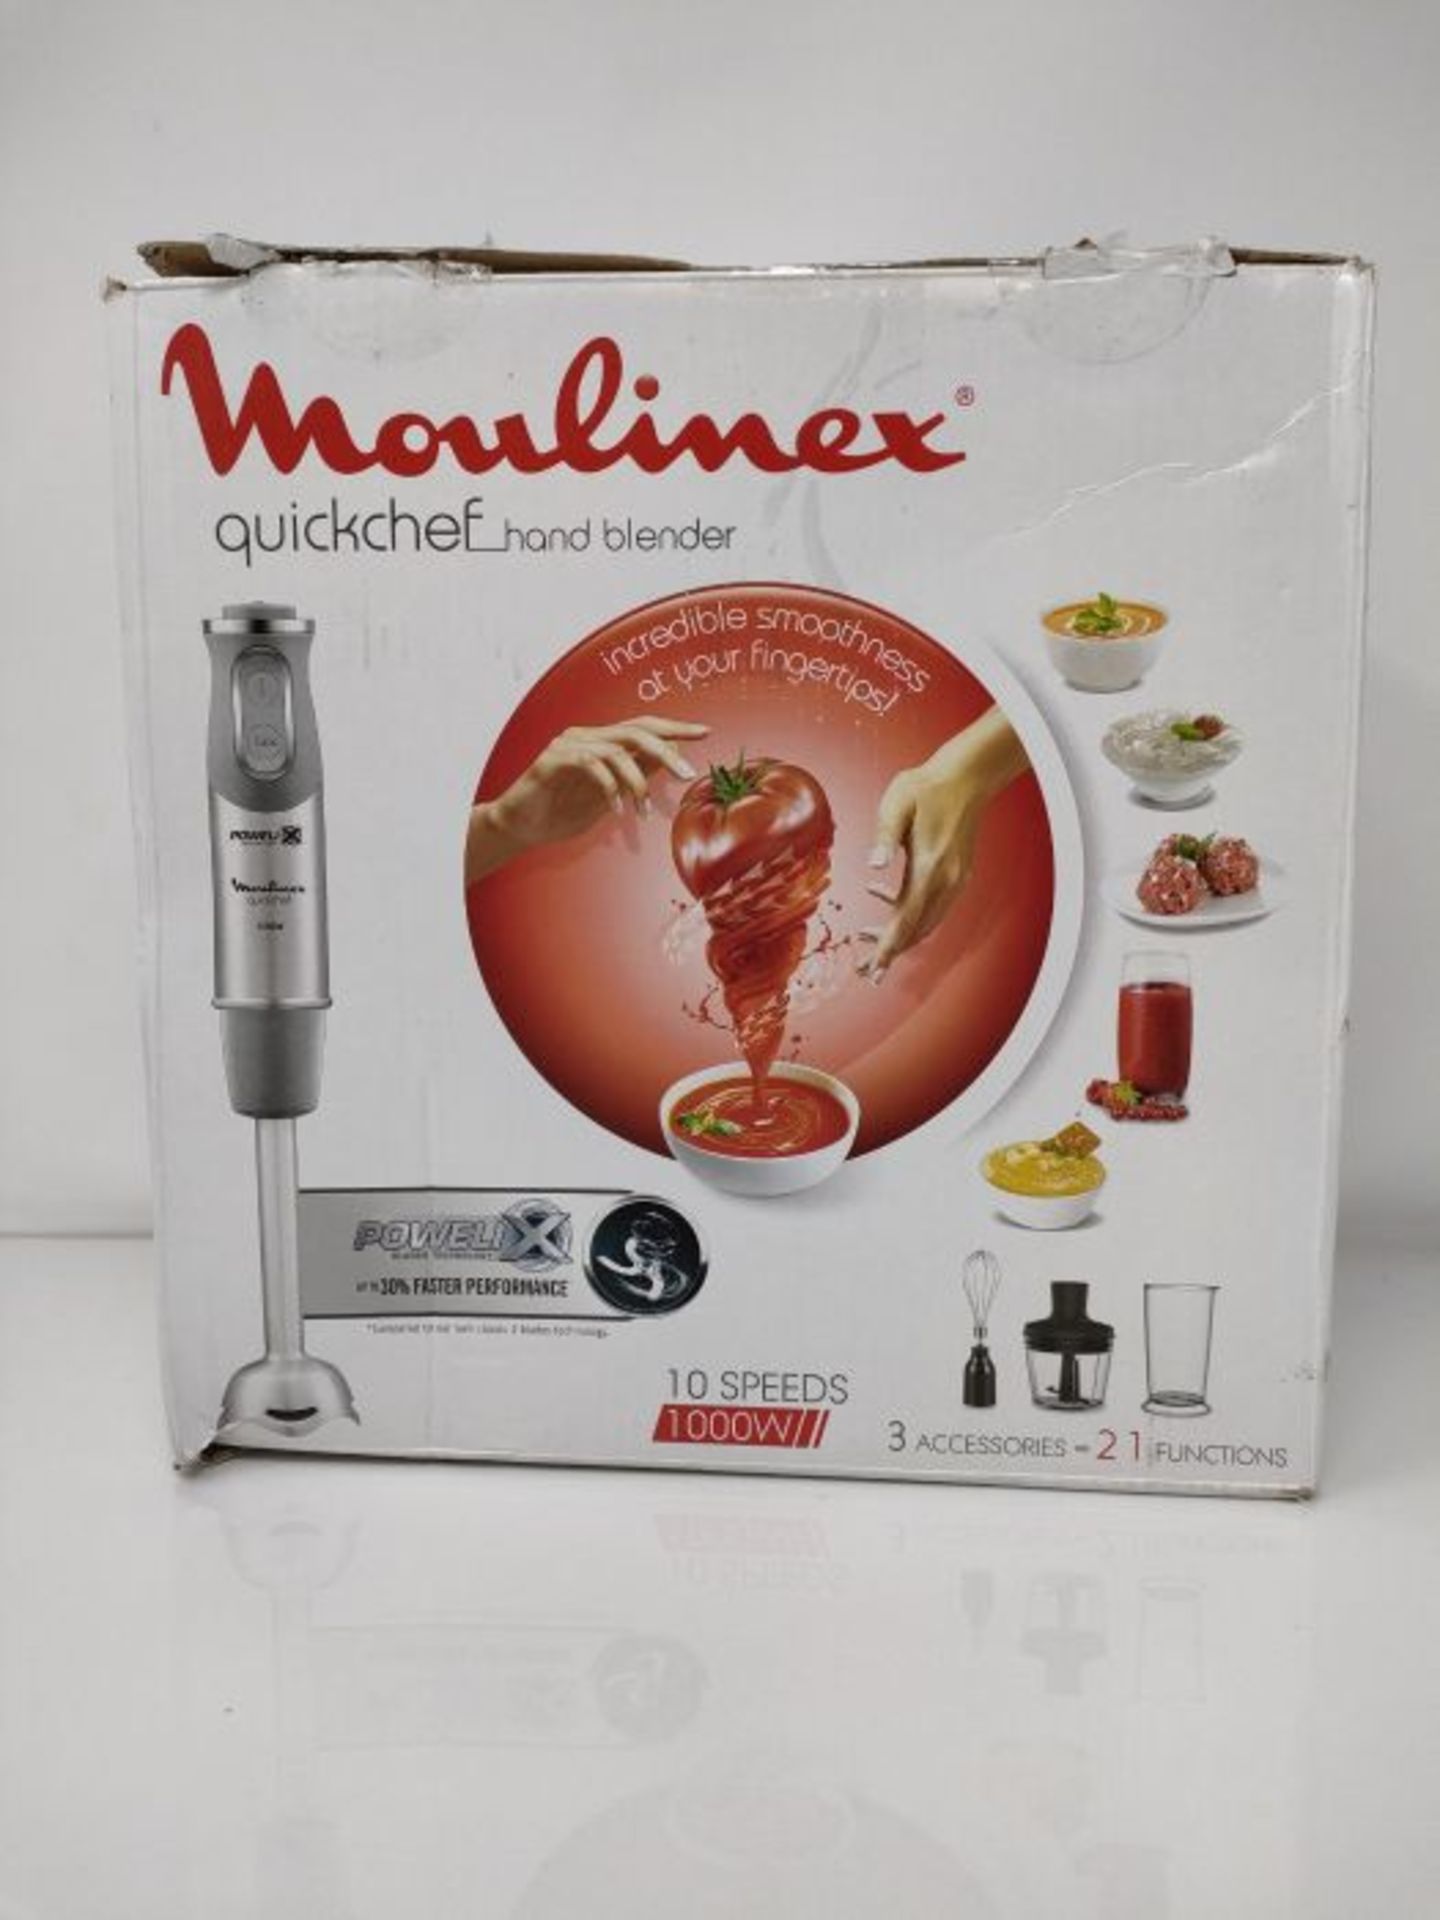 RRP £60.00 Moulinex quickchef - Hand Blender with 3 Accessories, Stainless Steel, 10 Speeds, - Image 2 of 3